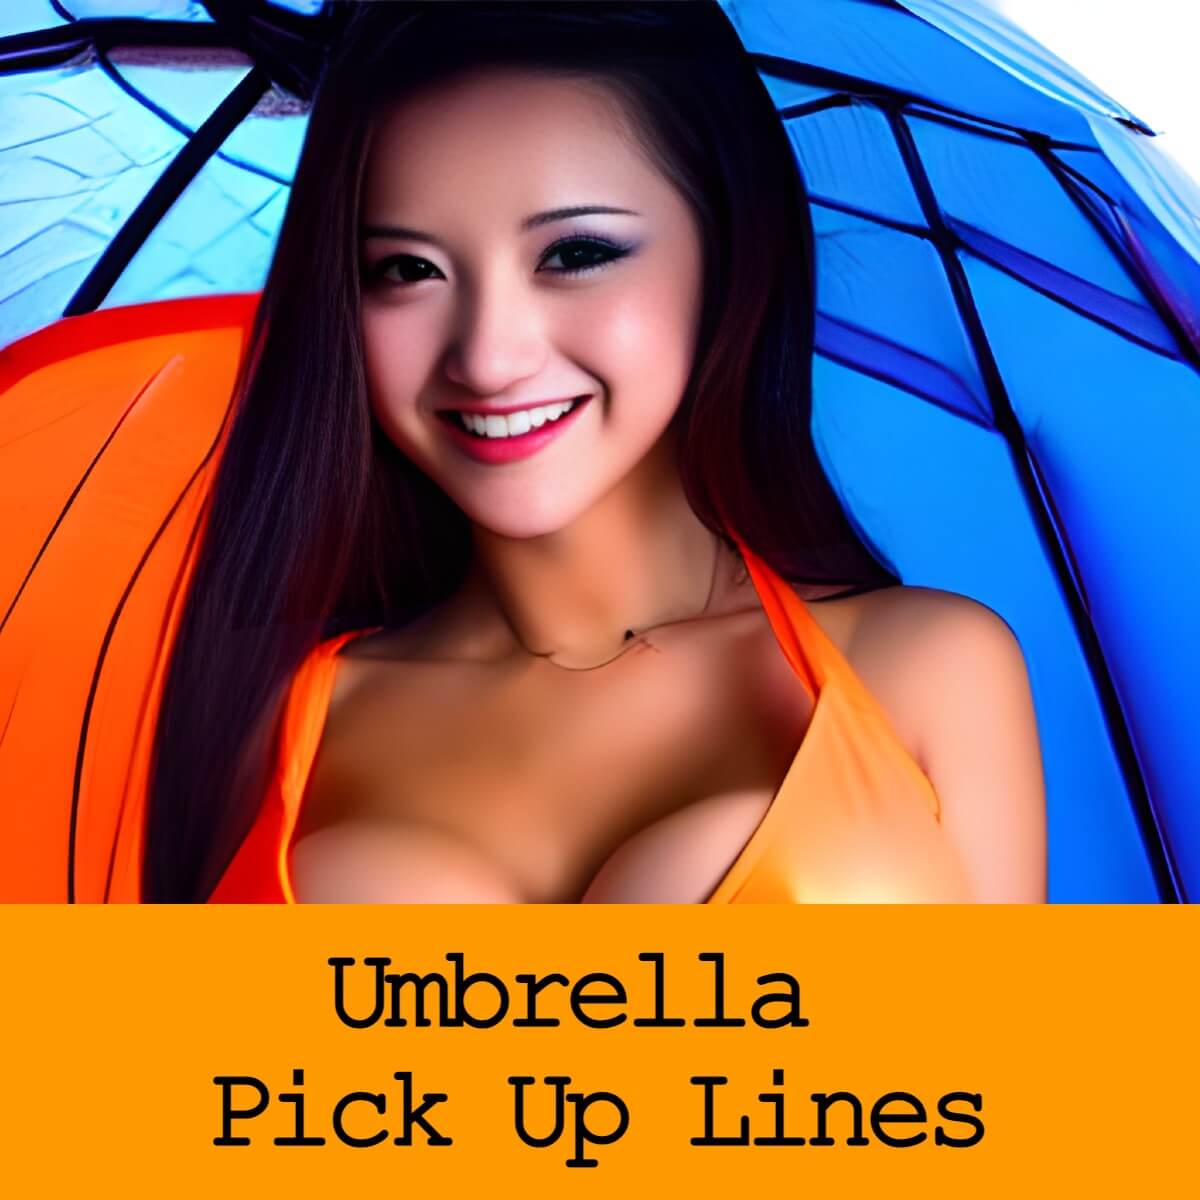 Pick Up Lines With Umbrellas